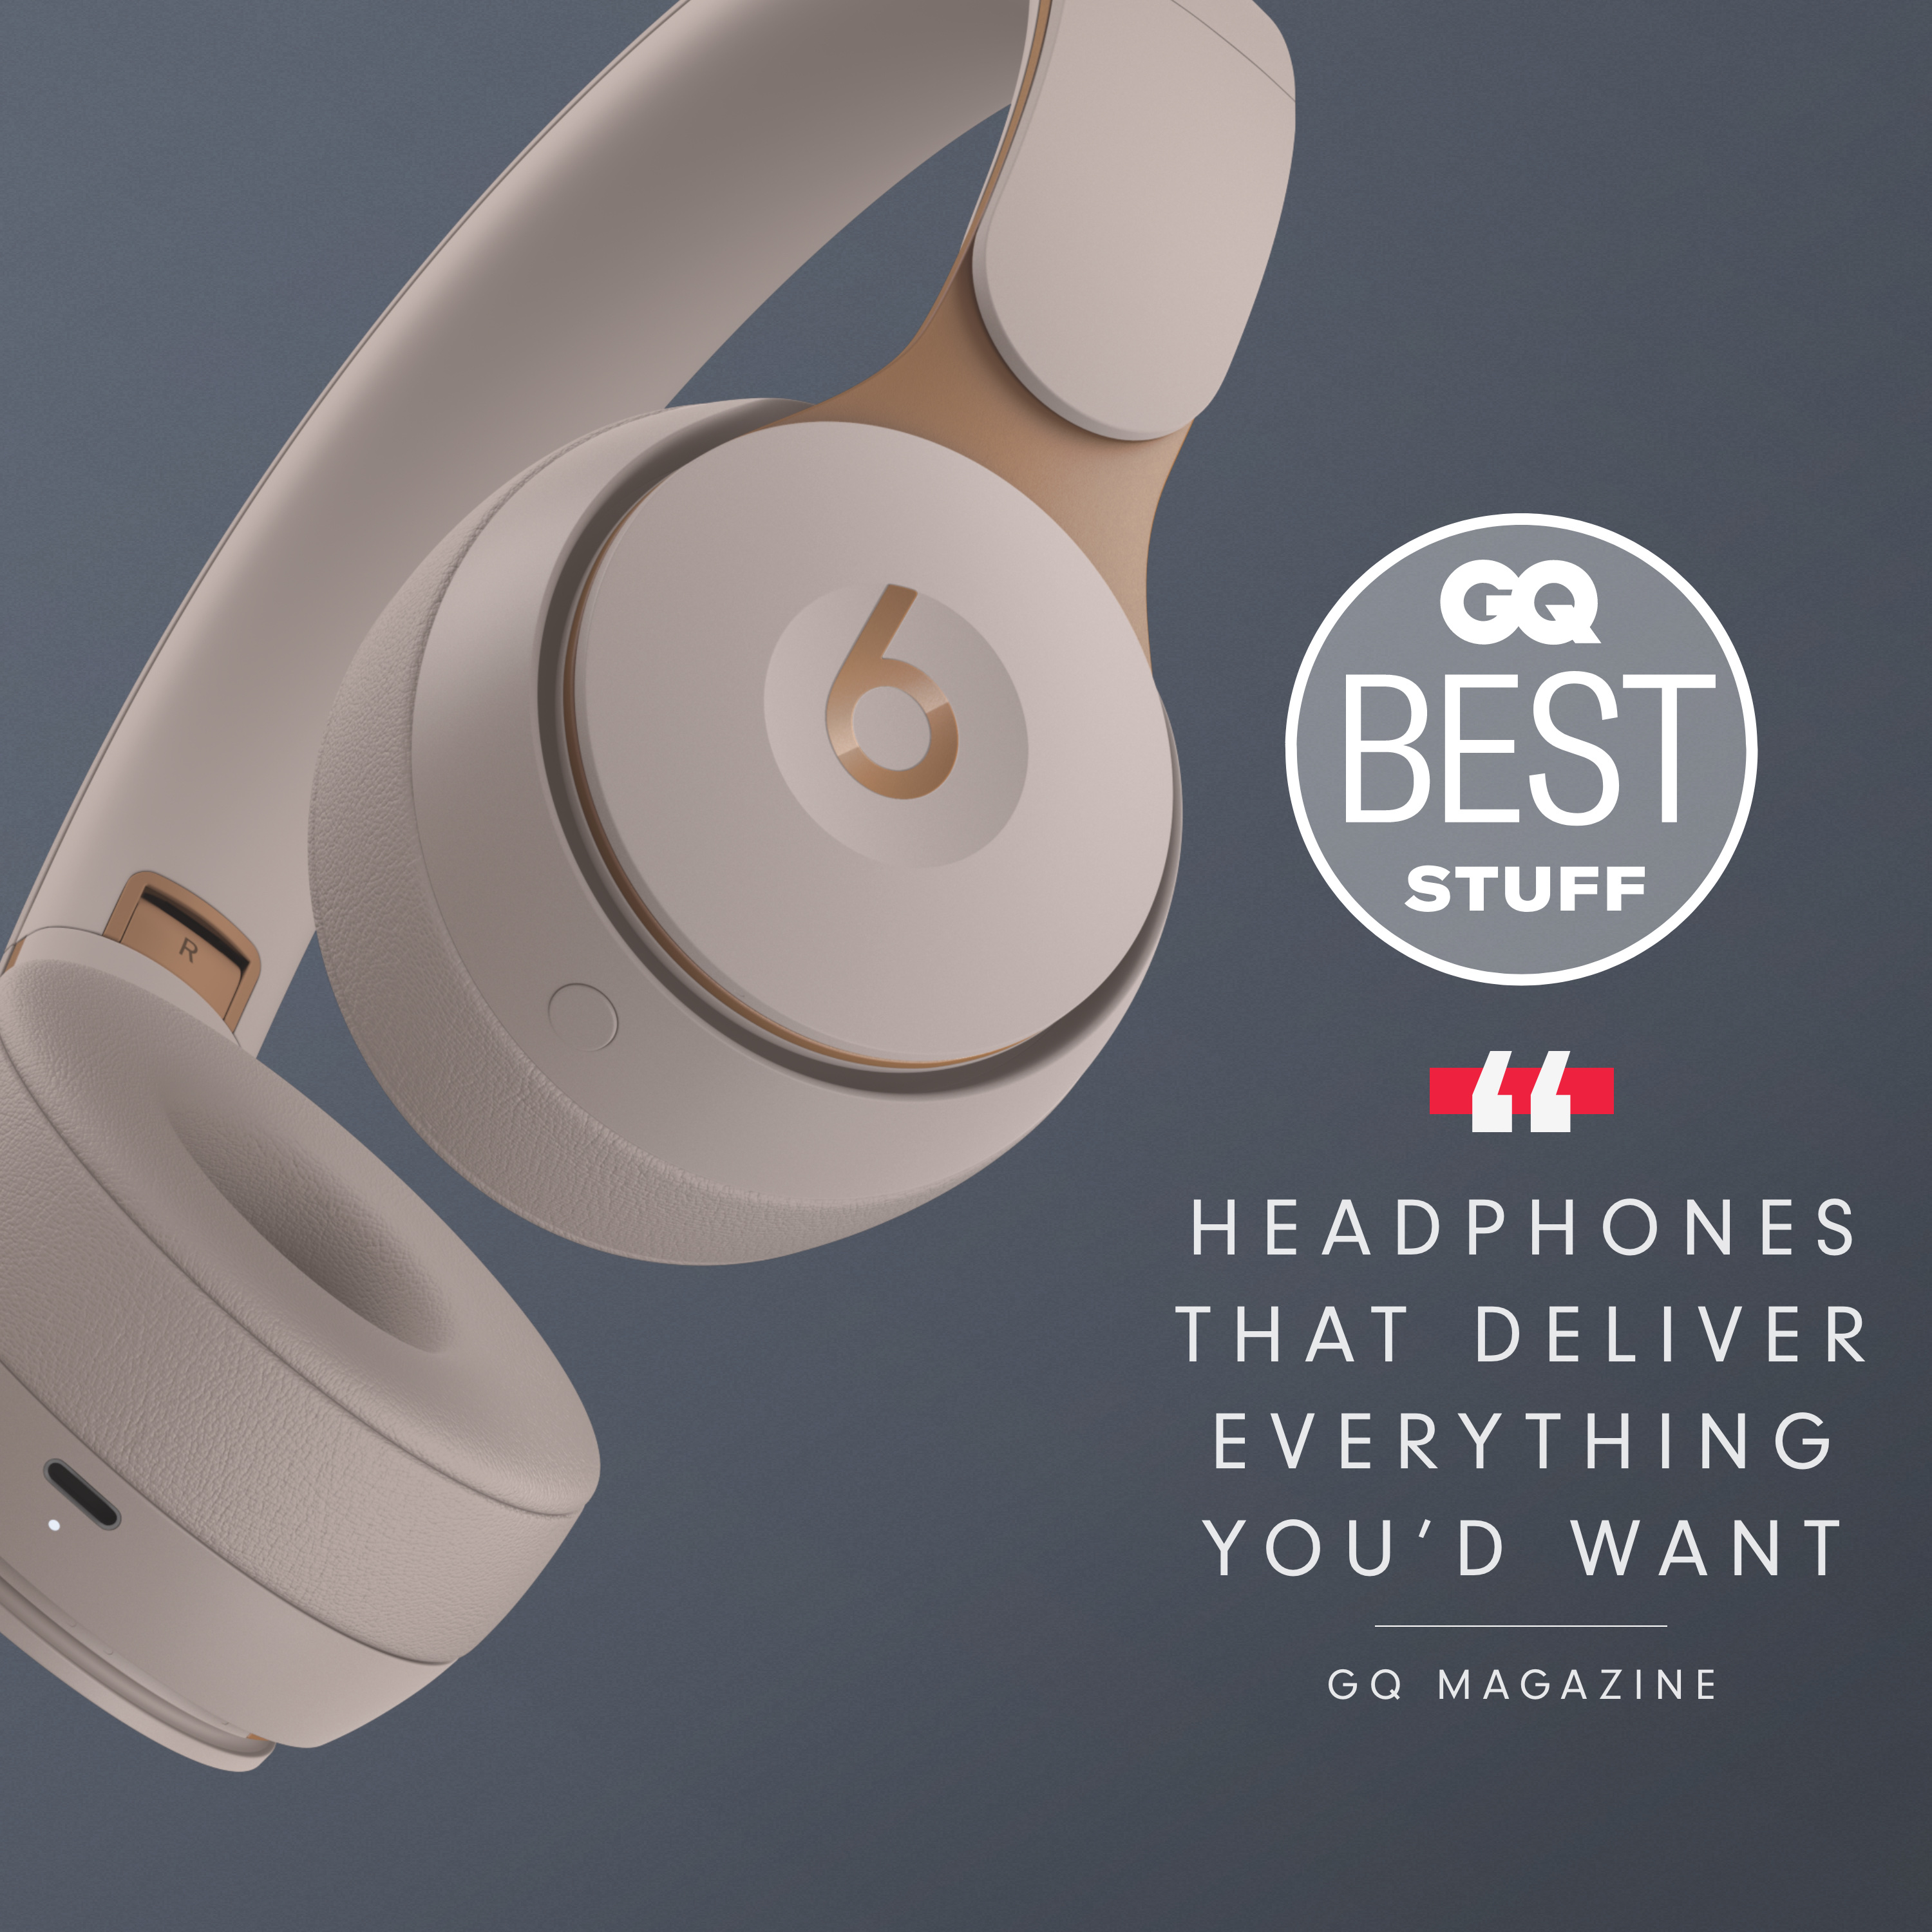 Beats Solo Pro Wireless Noise Cancelling On-Ear Headphones with Apple H1 Headphone Chip - Grey - image 6 of 13